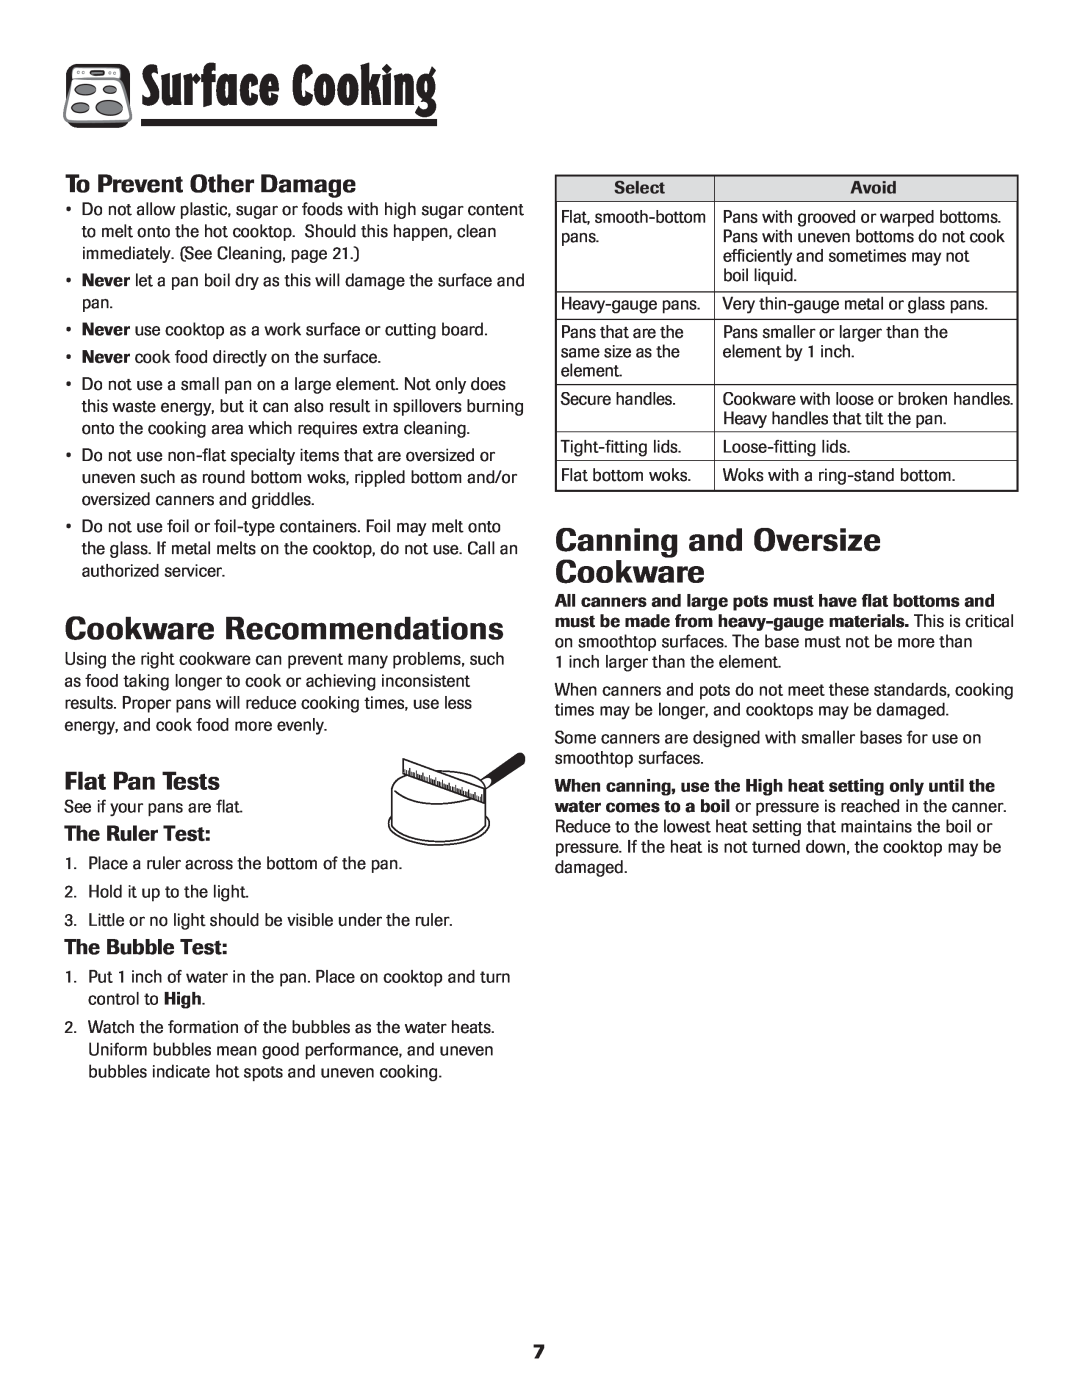 Maytag MER5875RAF manual Cookware Recommendations, Canning and Oversize Cookware, To Prevent Other Damage, Flat Pan Tests 